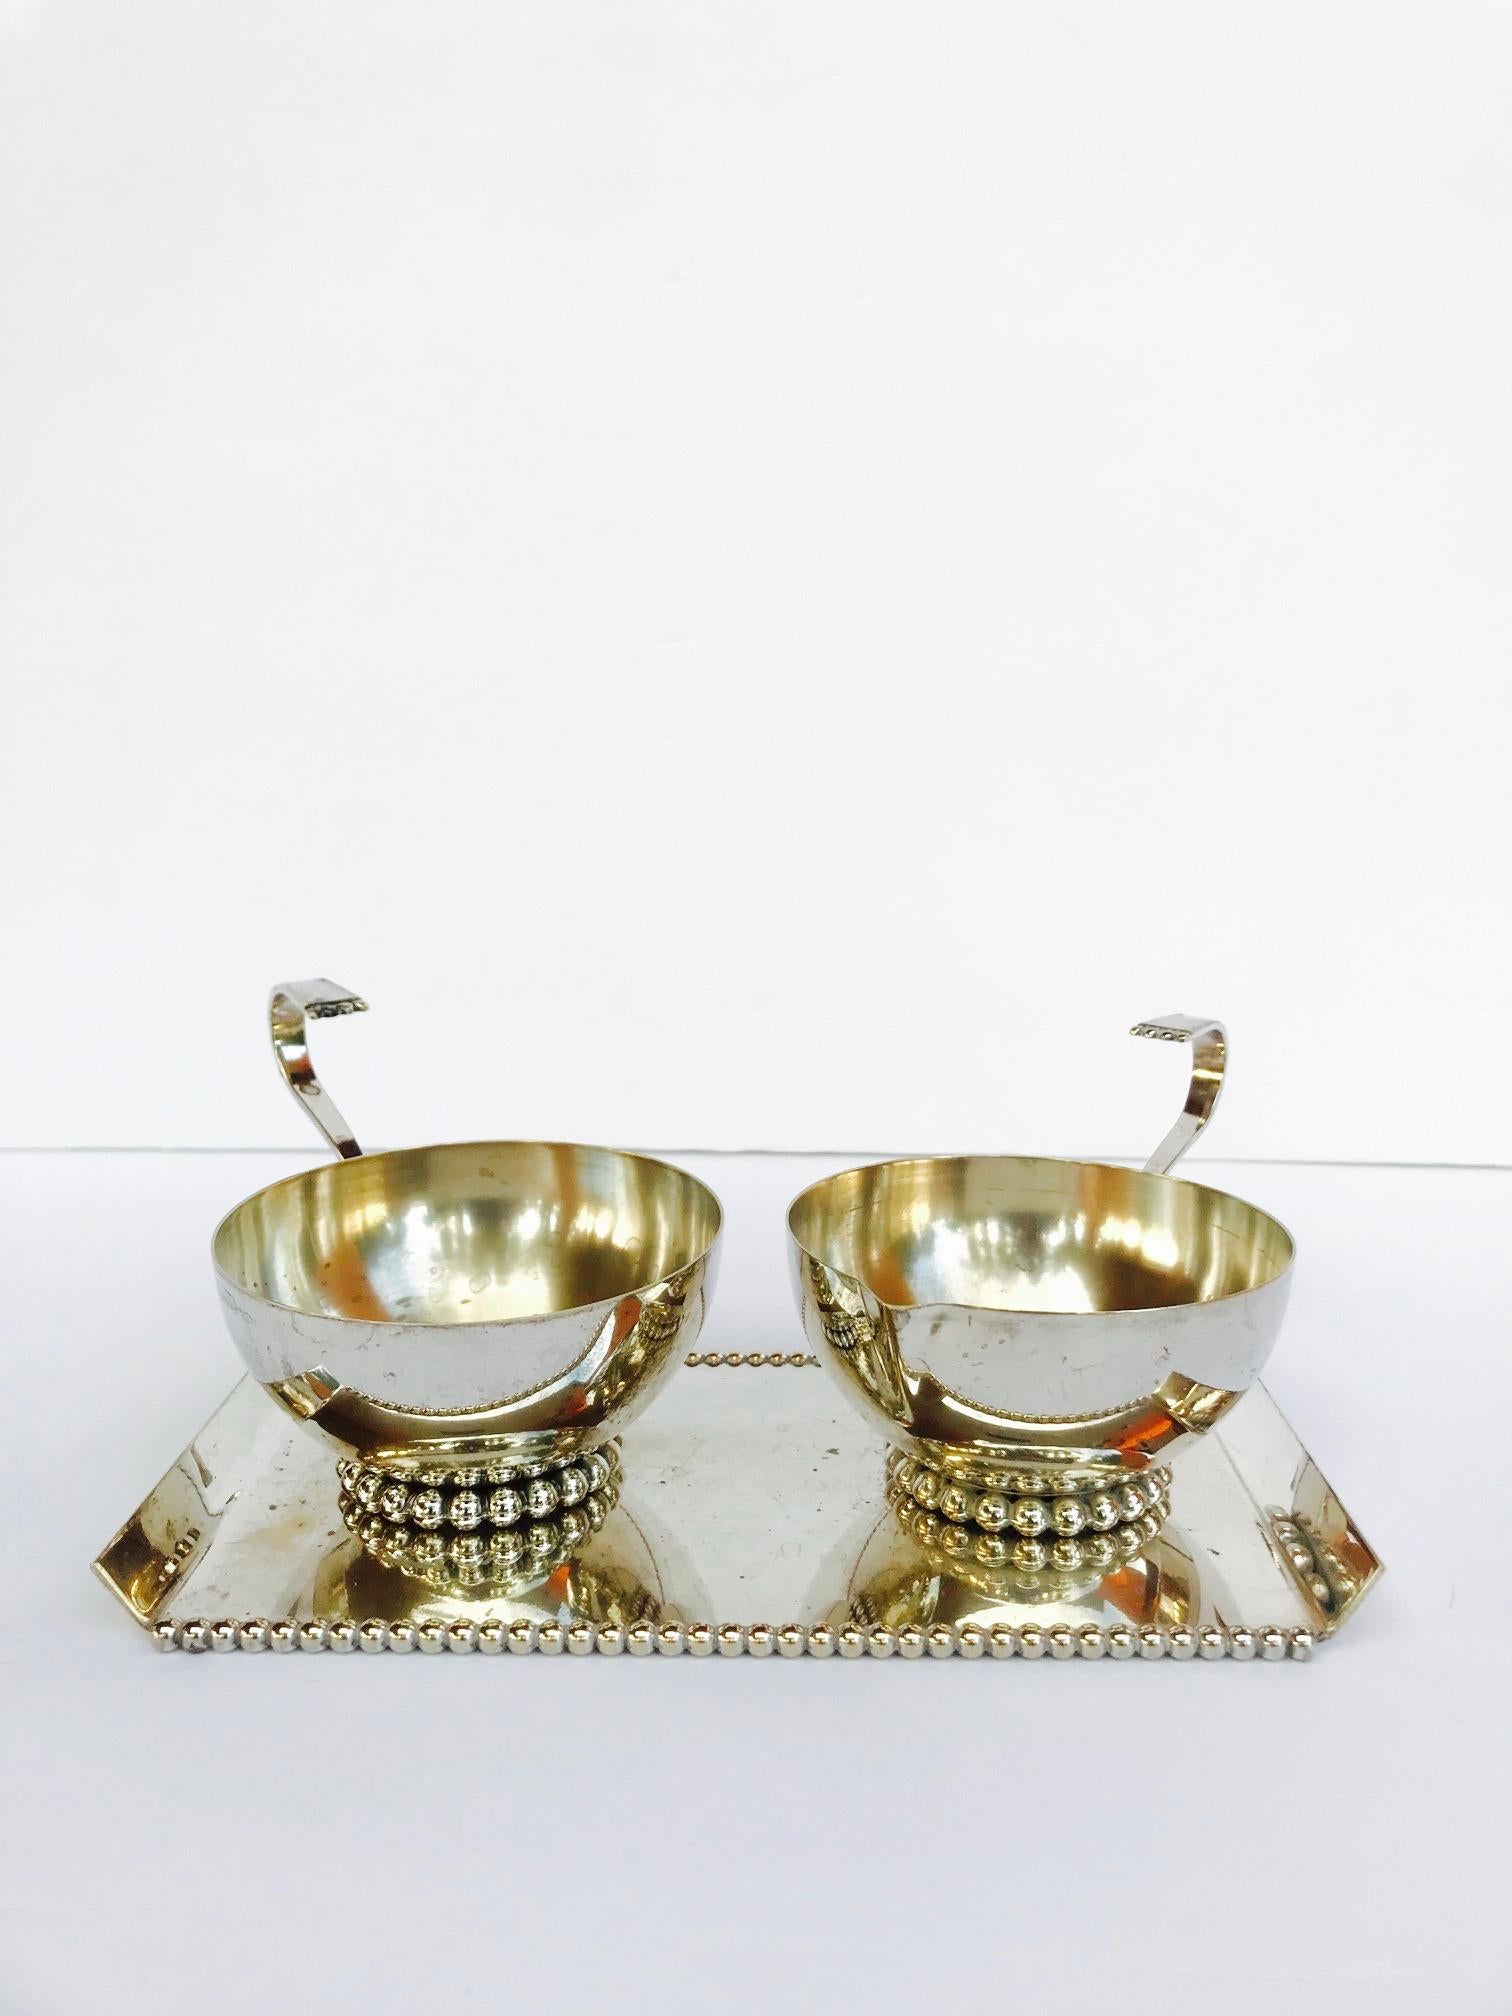 Italian Vintage Silver Plated Sugar and Creamer Serving Set, Italy, C. 1970s For Sale